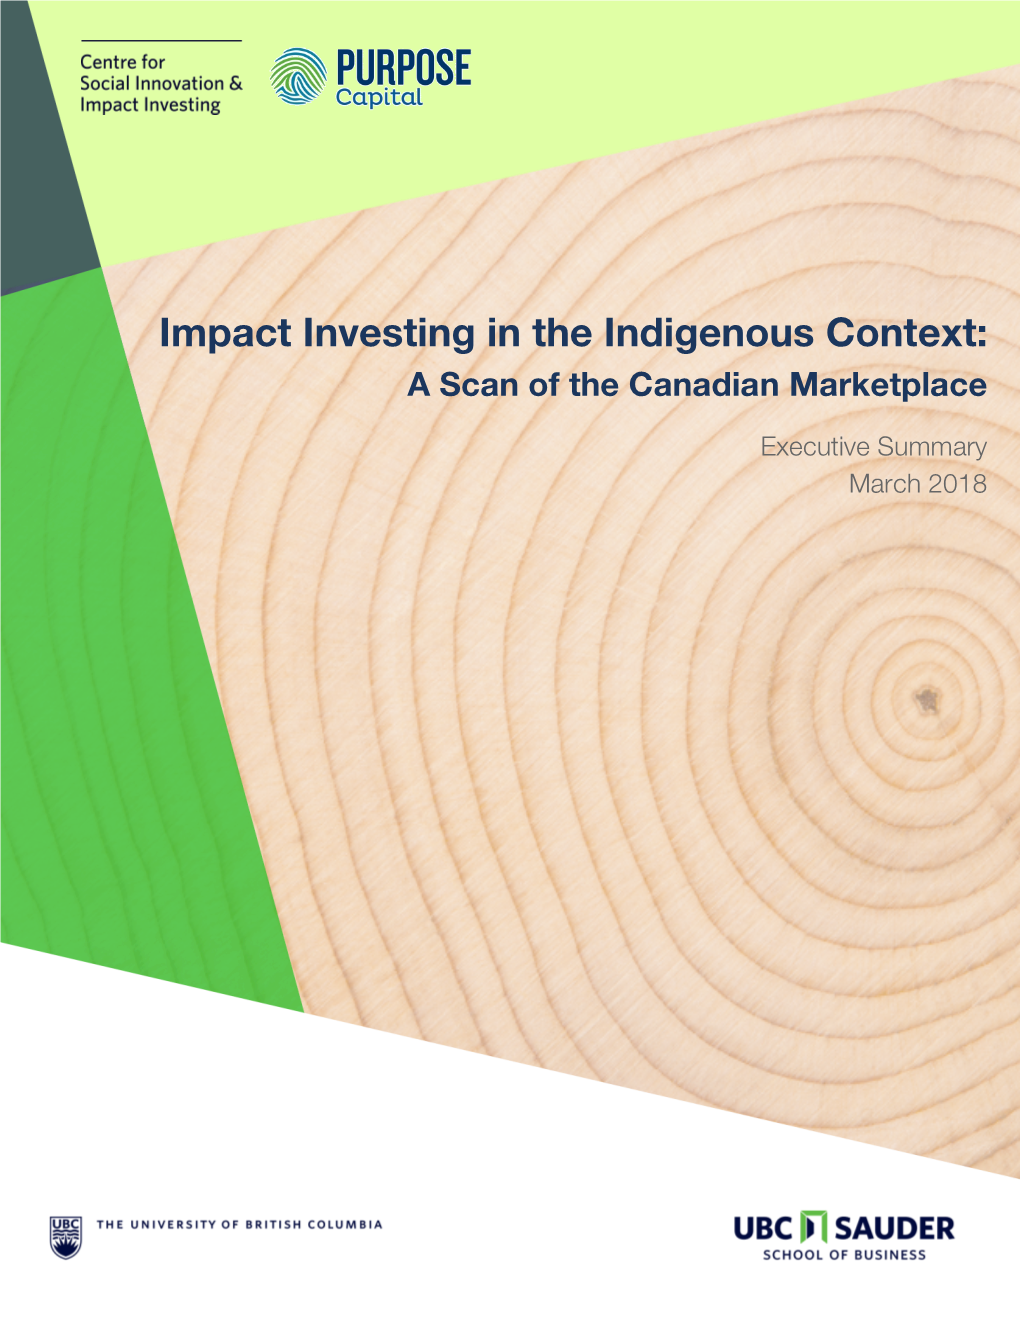 Impact Investing in the Indigenous Context: a Scan of the Canadian Marketplace